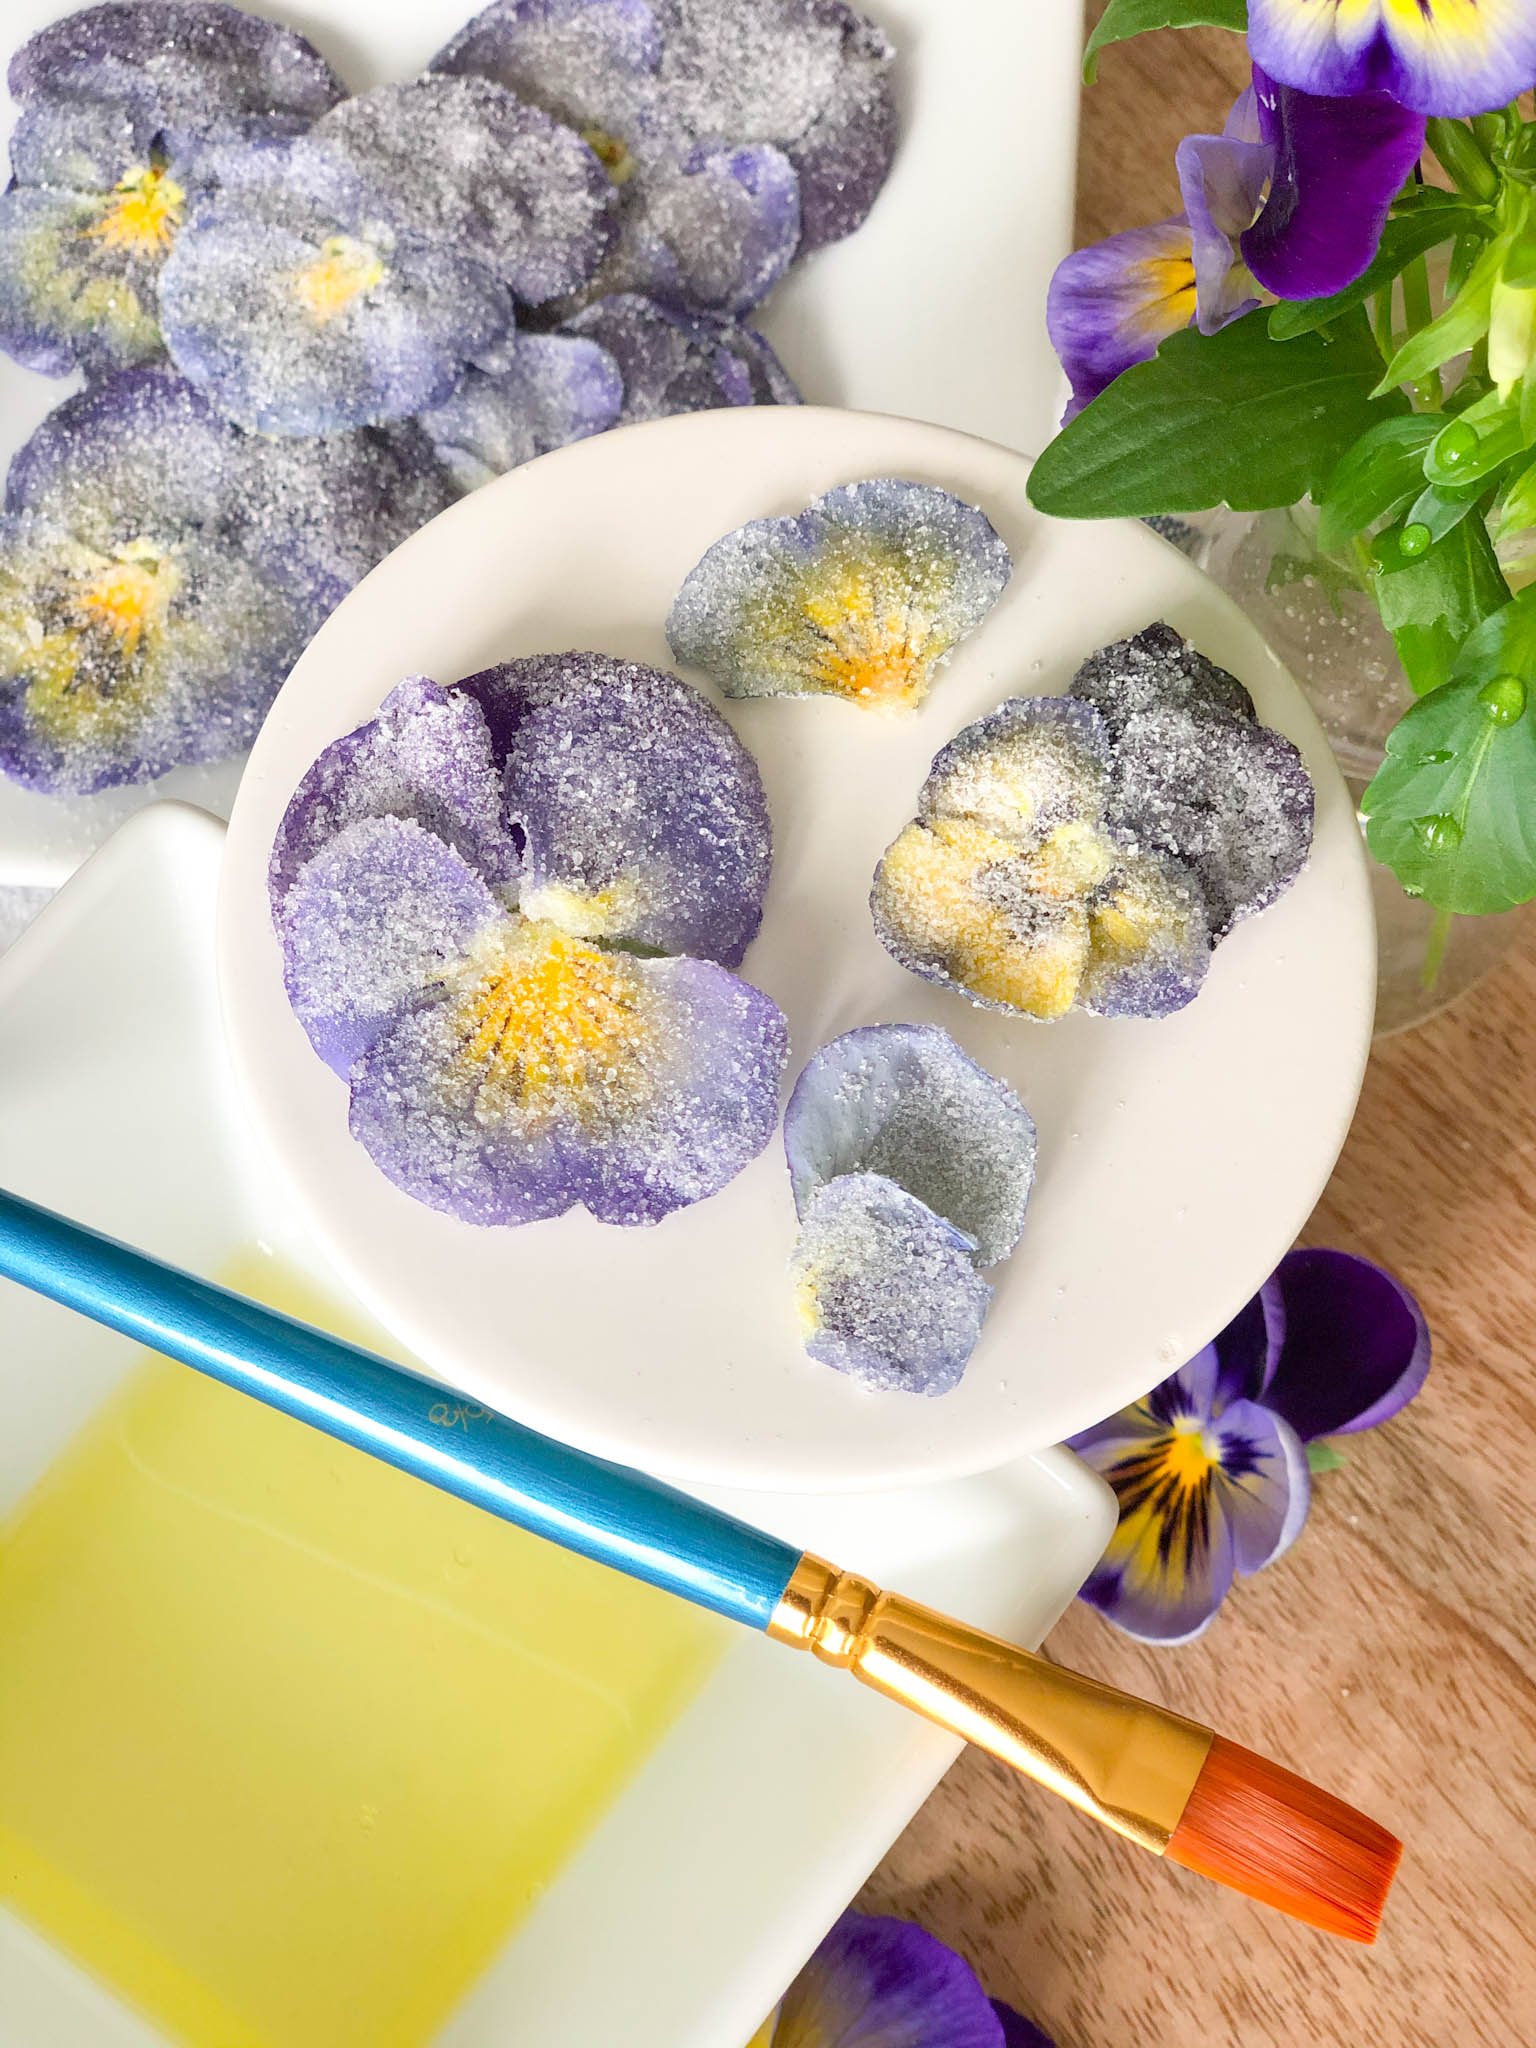 How to identify and use edible flowers